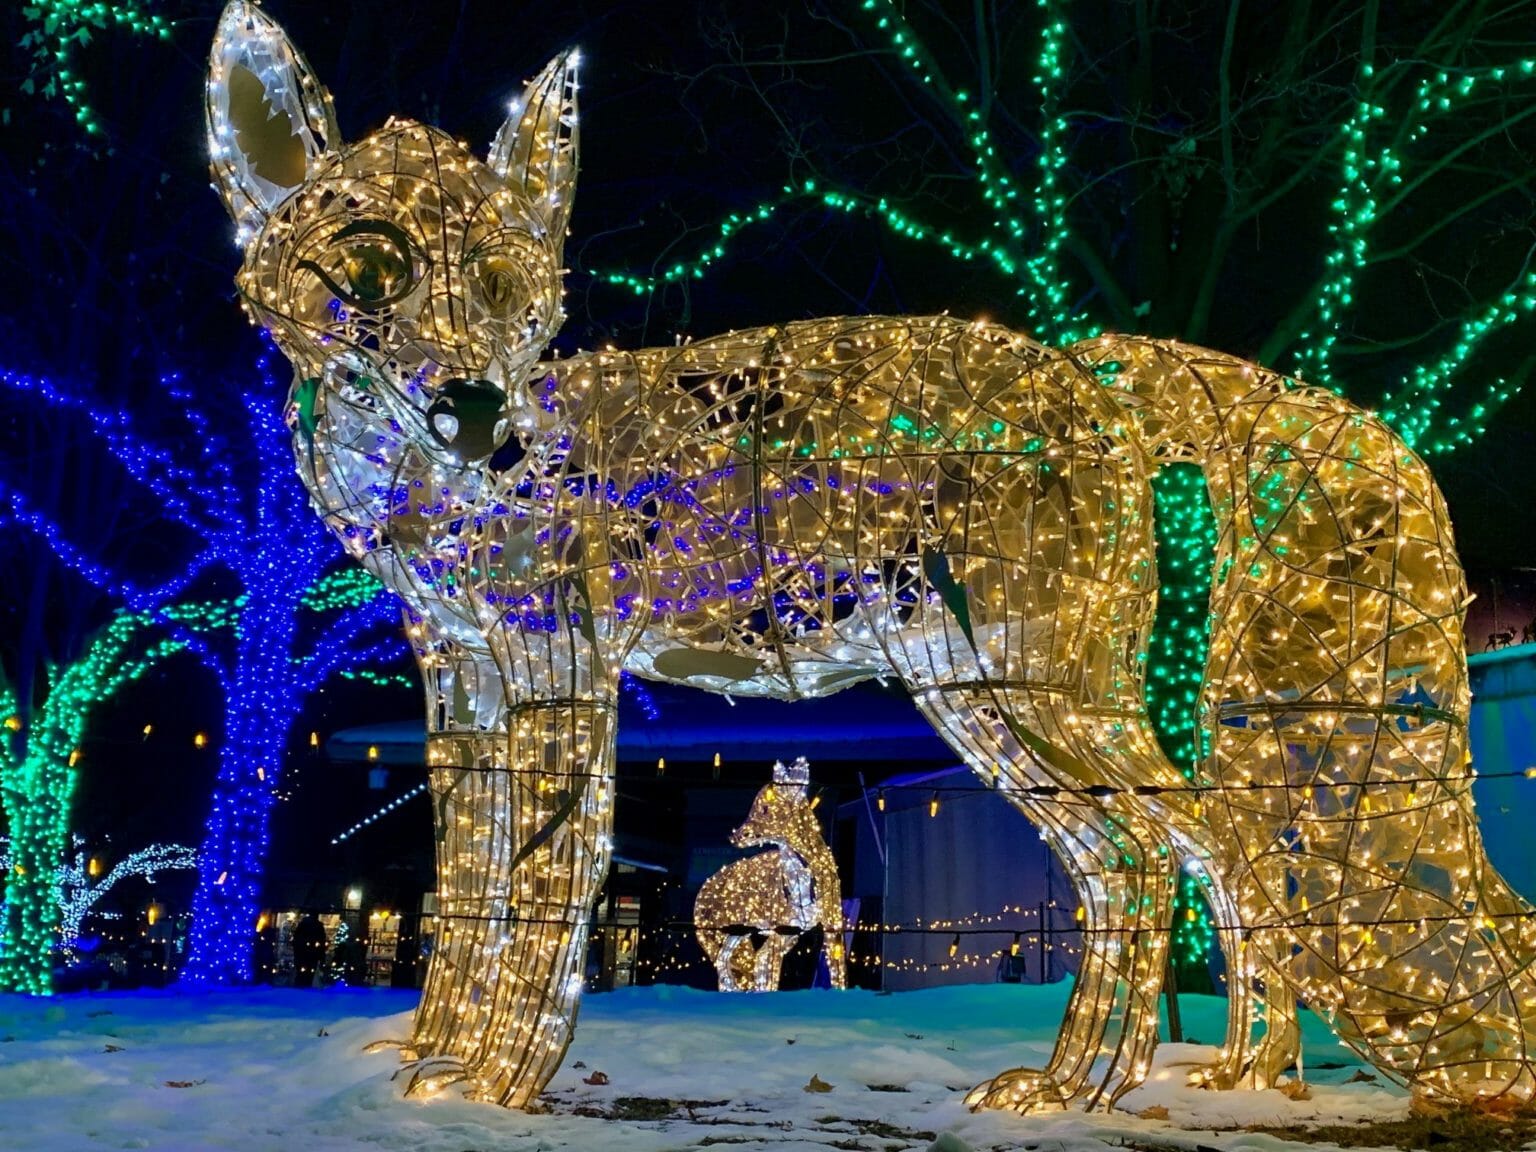 Wild LightsLight up your night this holiday season in the Detroit Zoo Good Mood